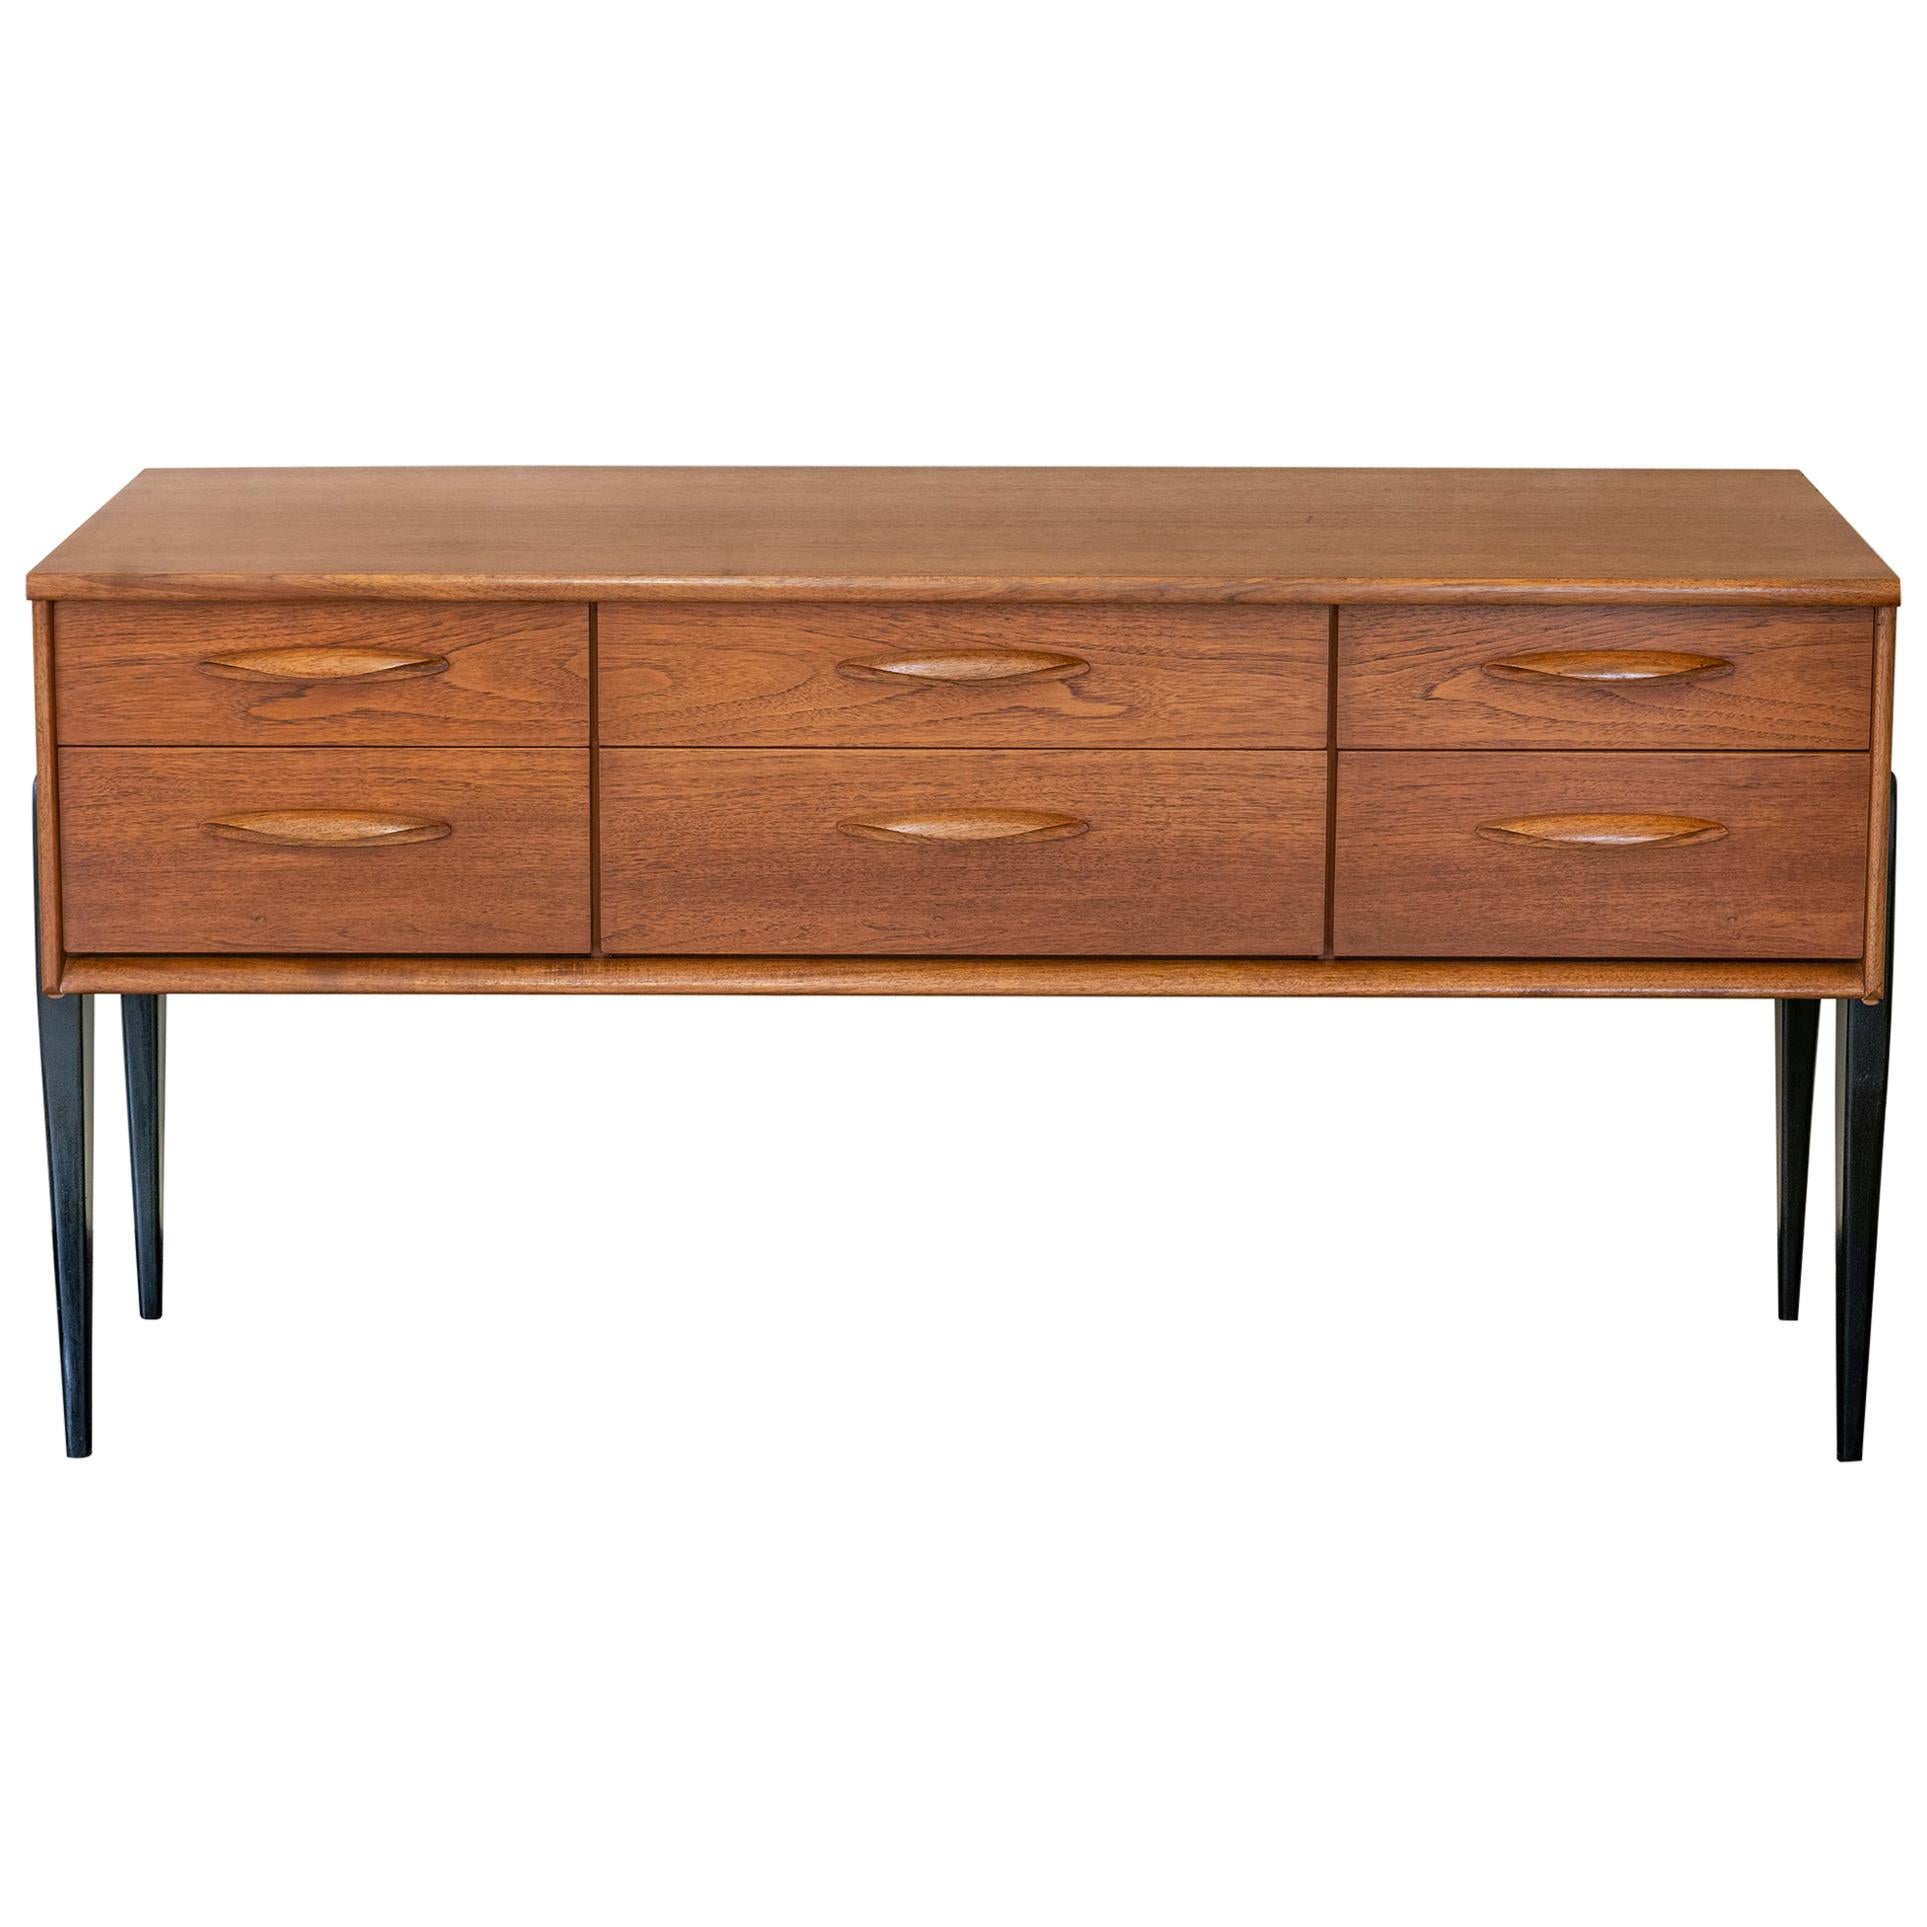 1960s English Teak Chest of Drawers by Austin Suite Ltd. For Sale